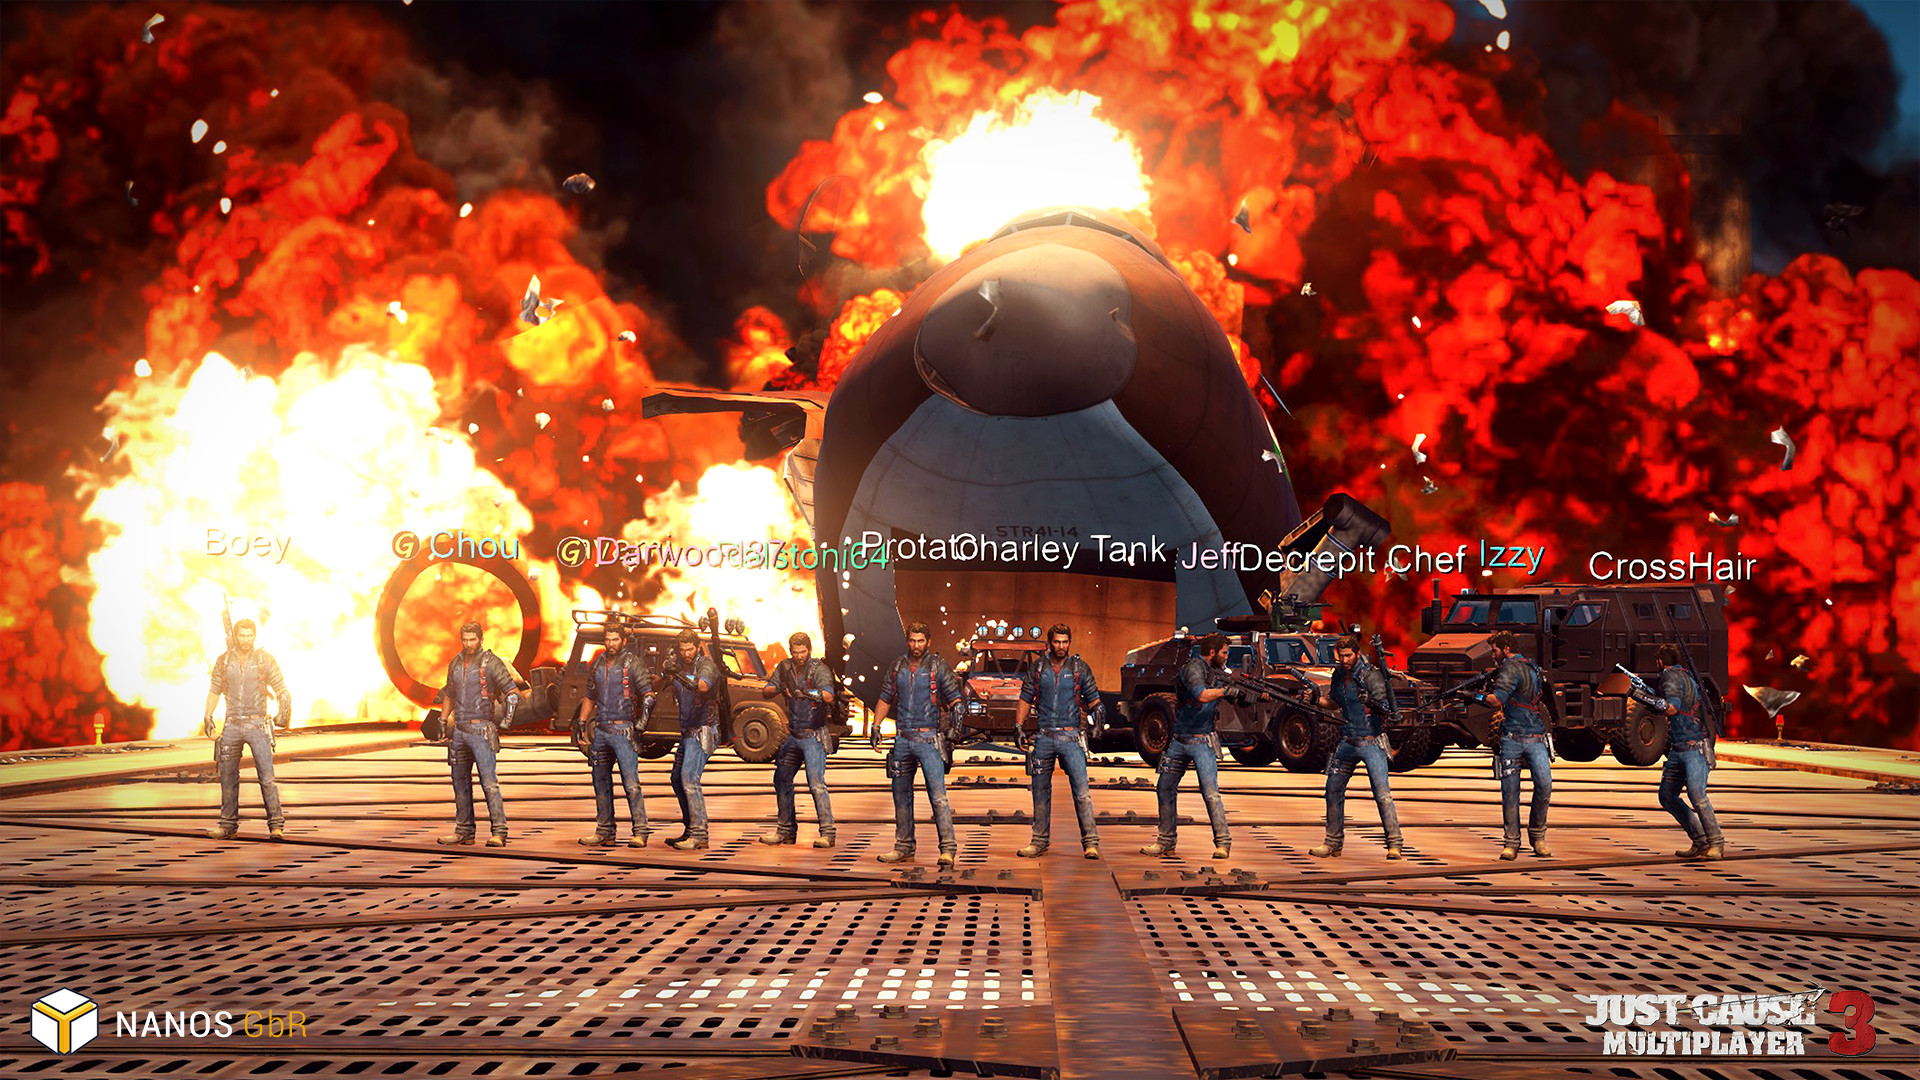 Just Cause 3 Multiplayer Xbox One - HD Wallpaper 